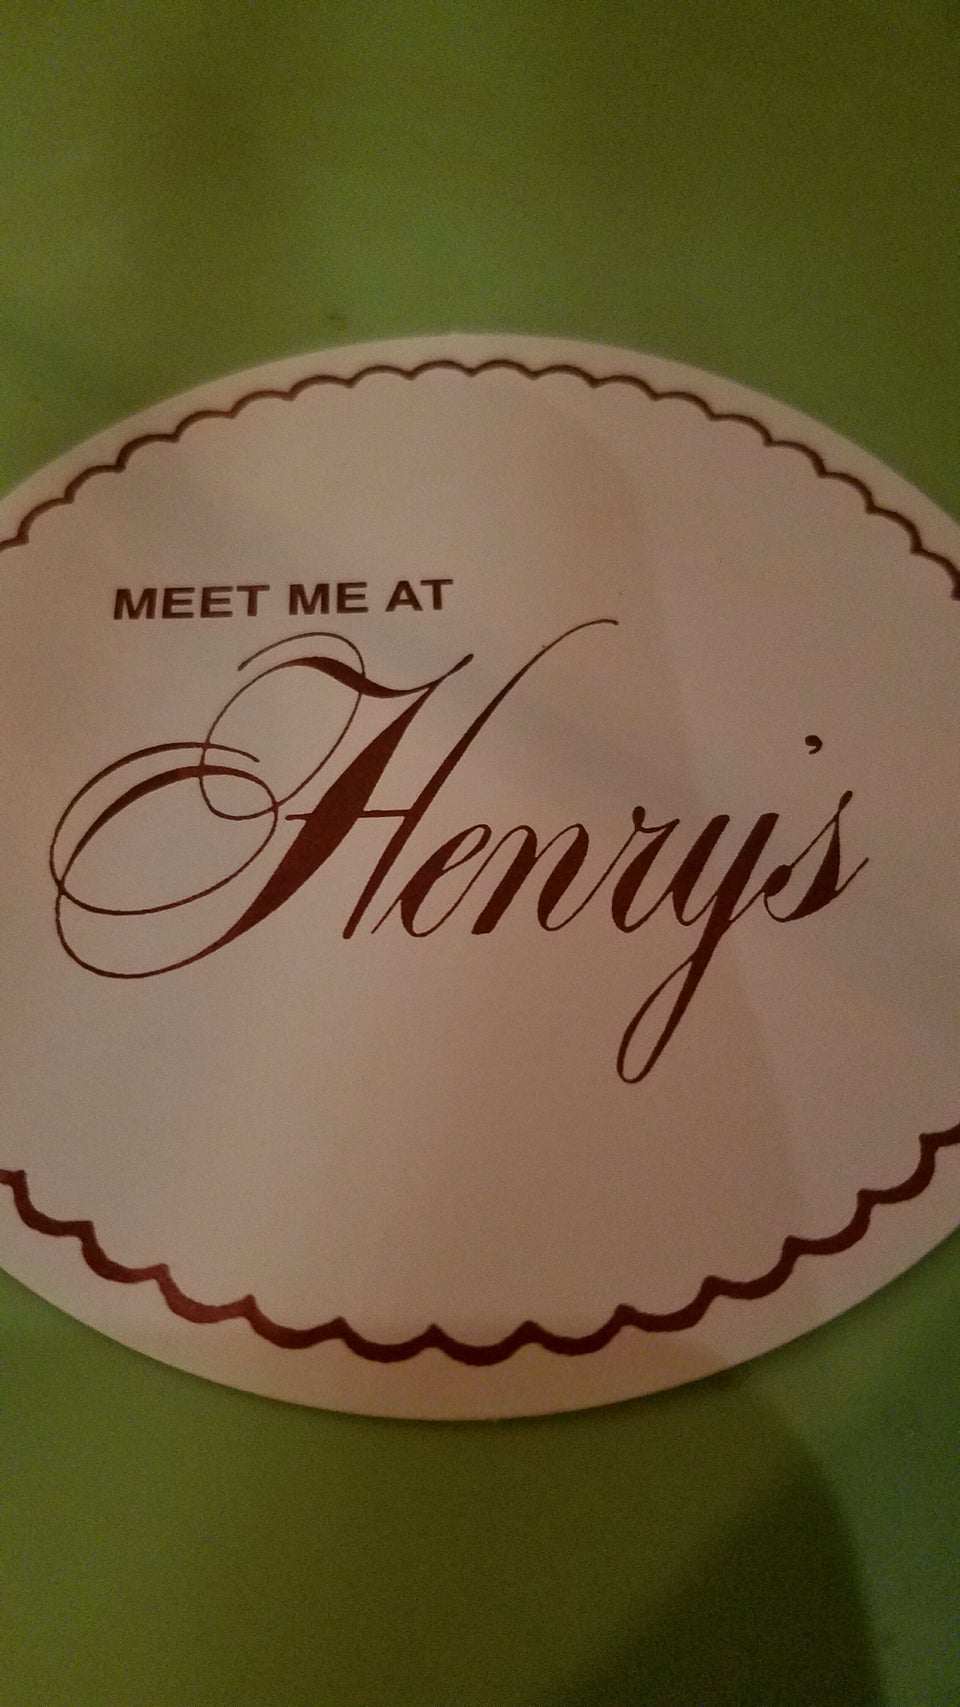 Photo of Henry's